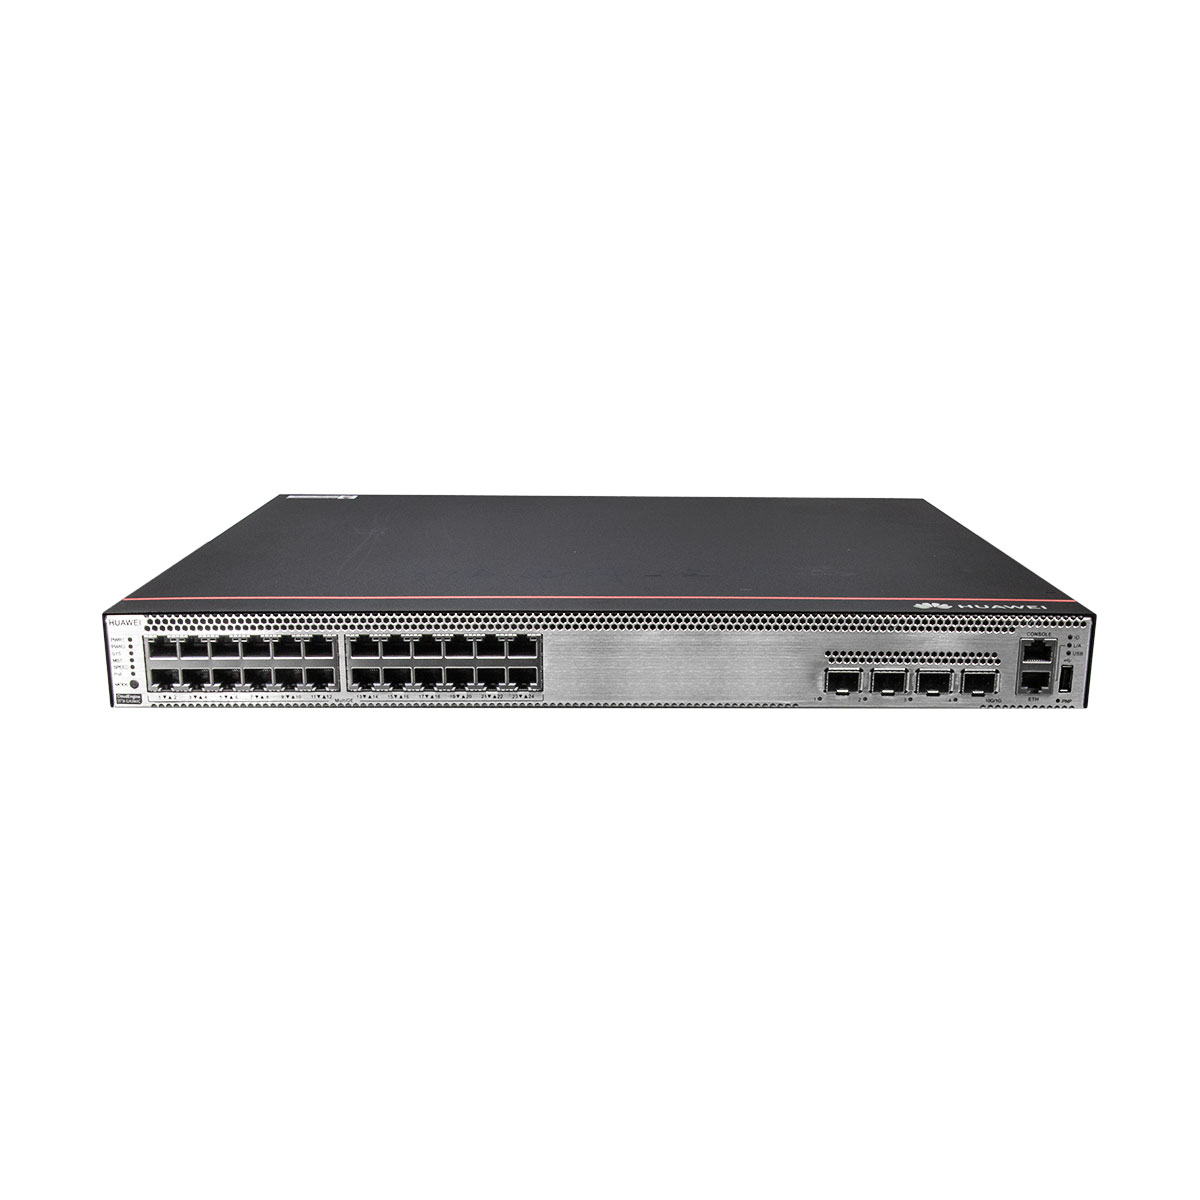 S5736-S24UM4XC best price at huawei authorized partner Telecomate.com